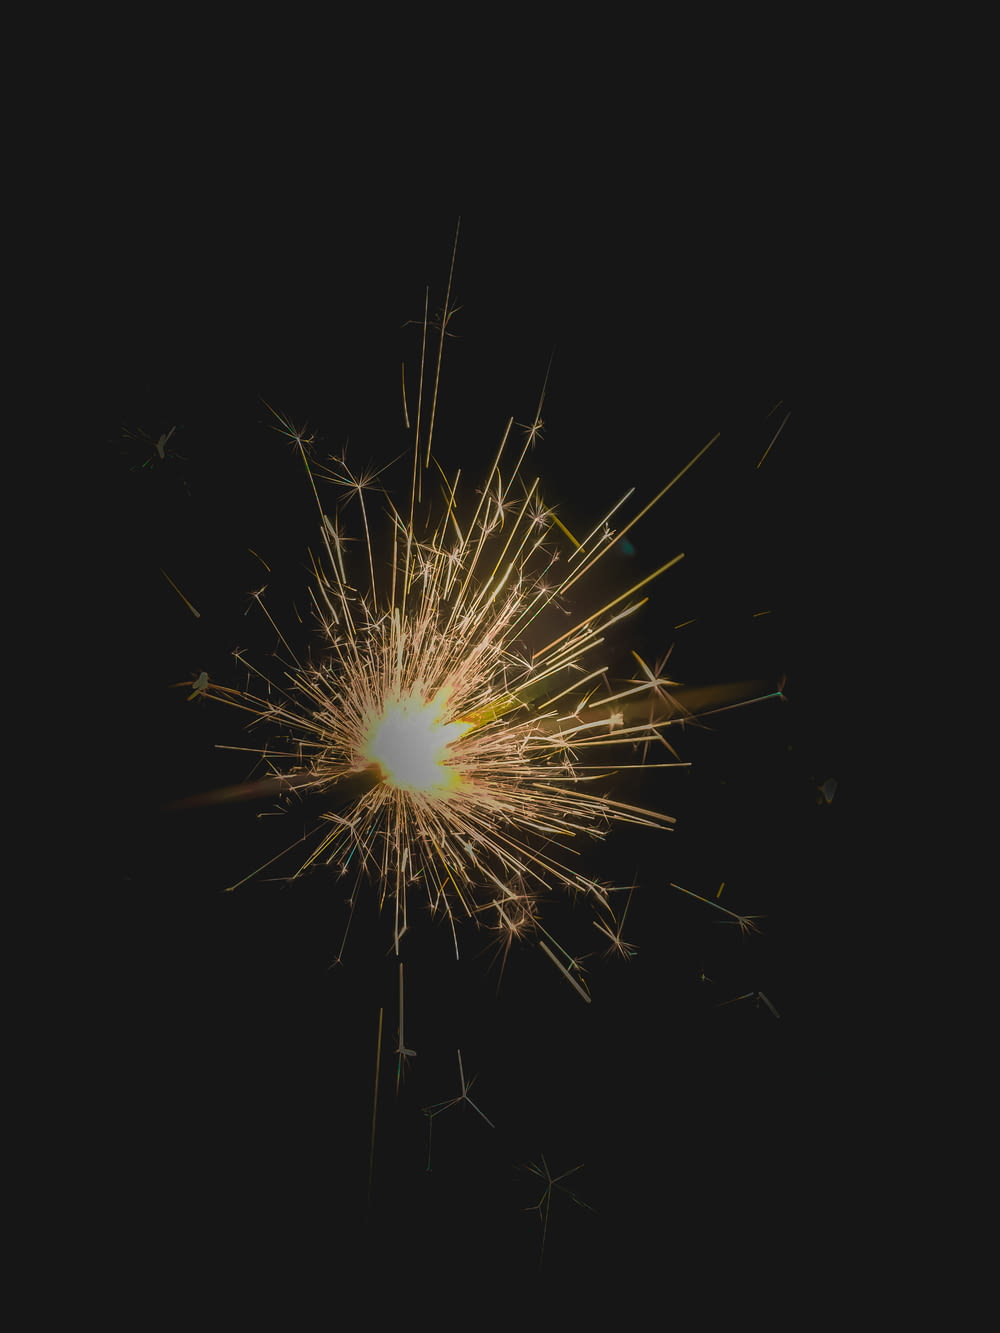 a bright yellow and white fireworks display